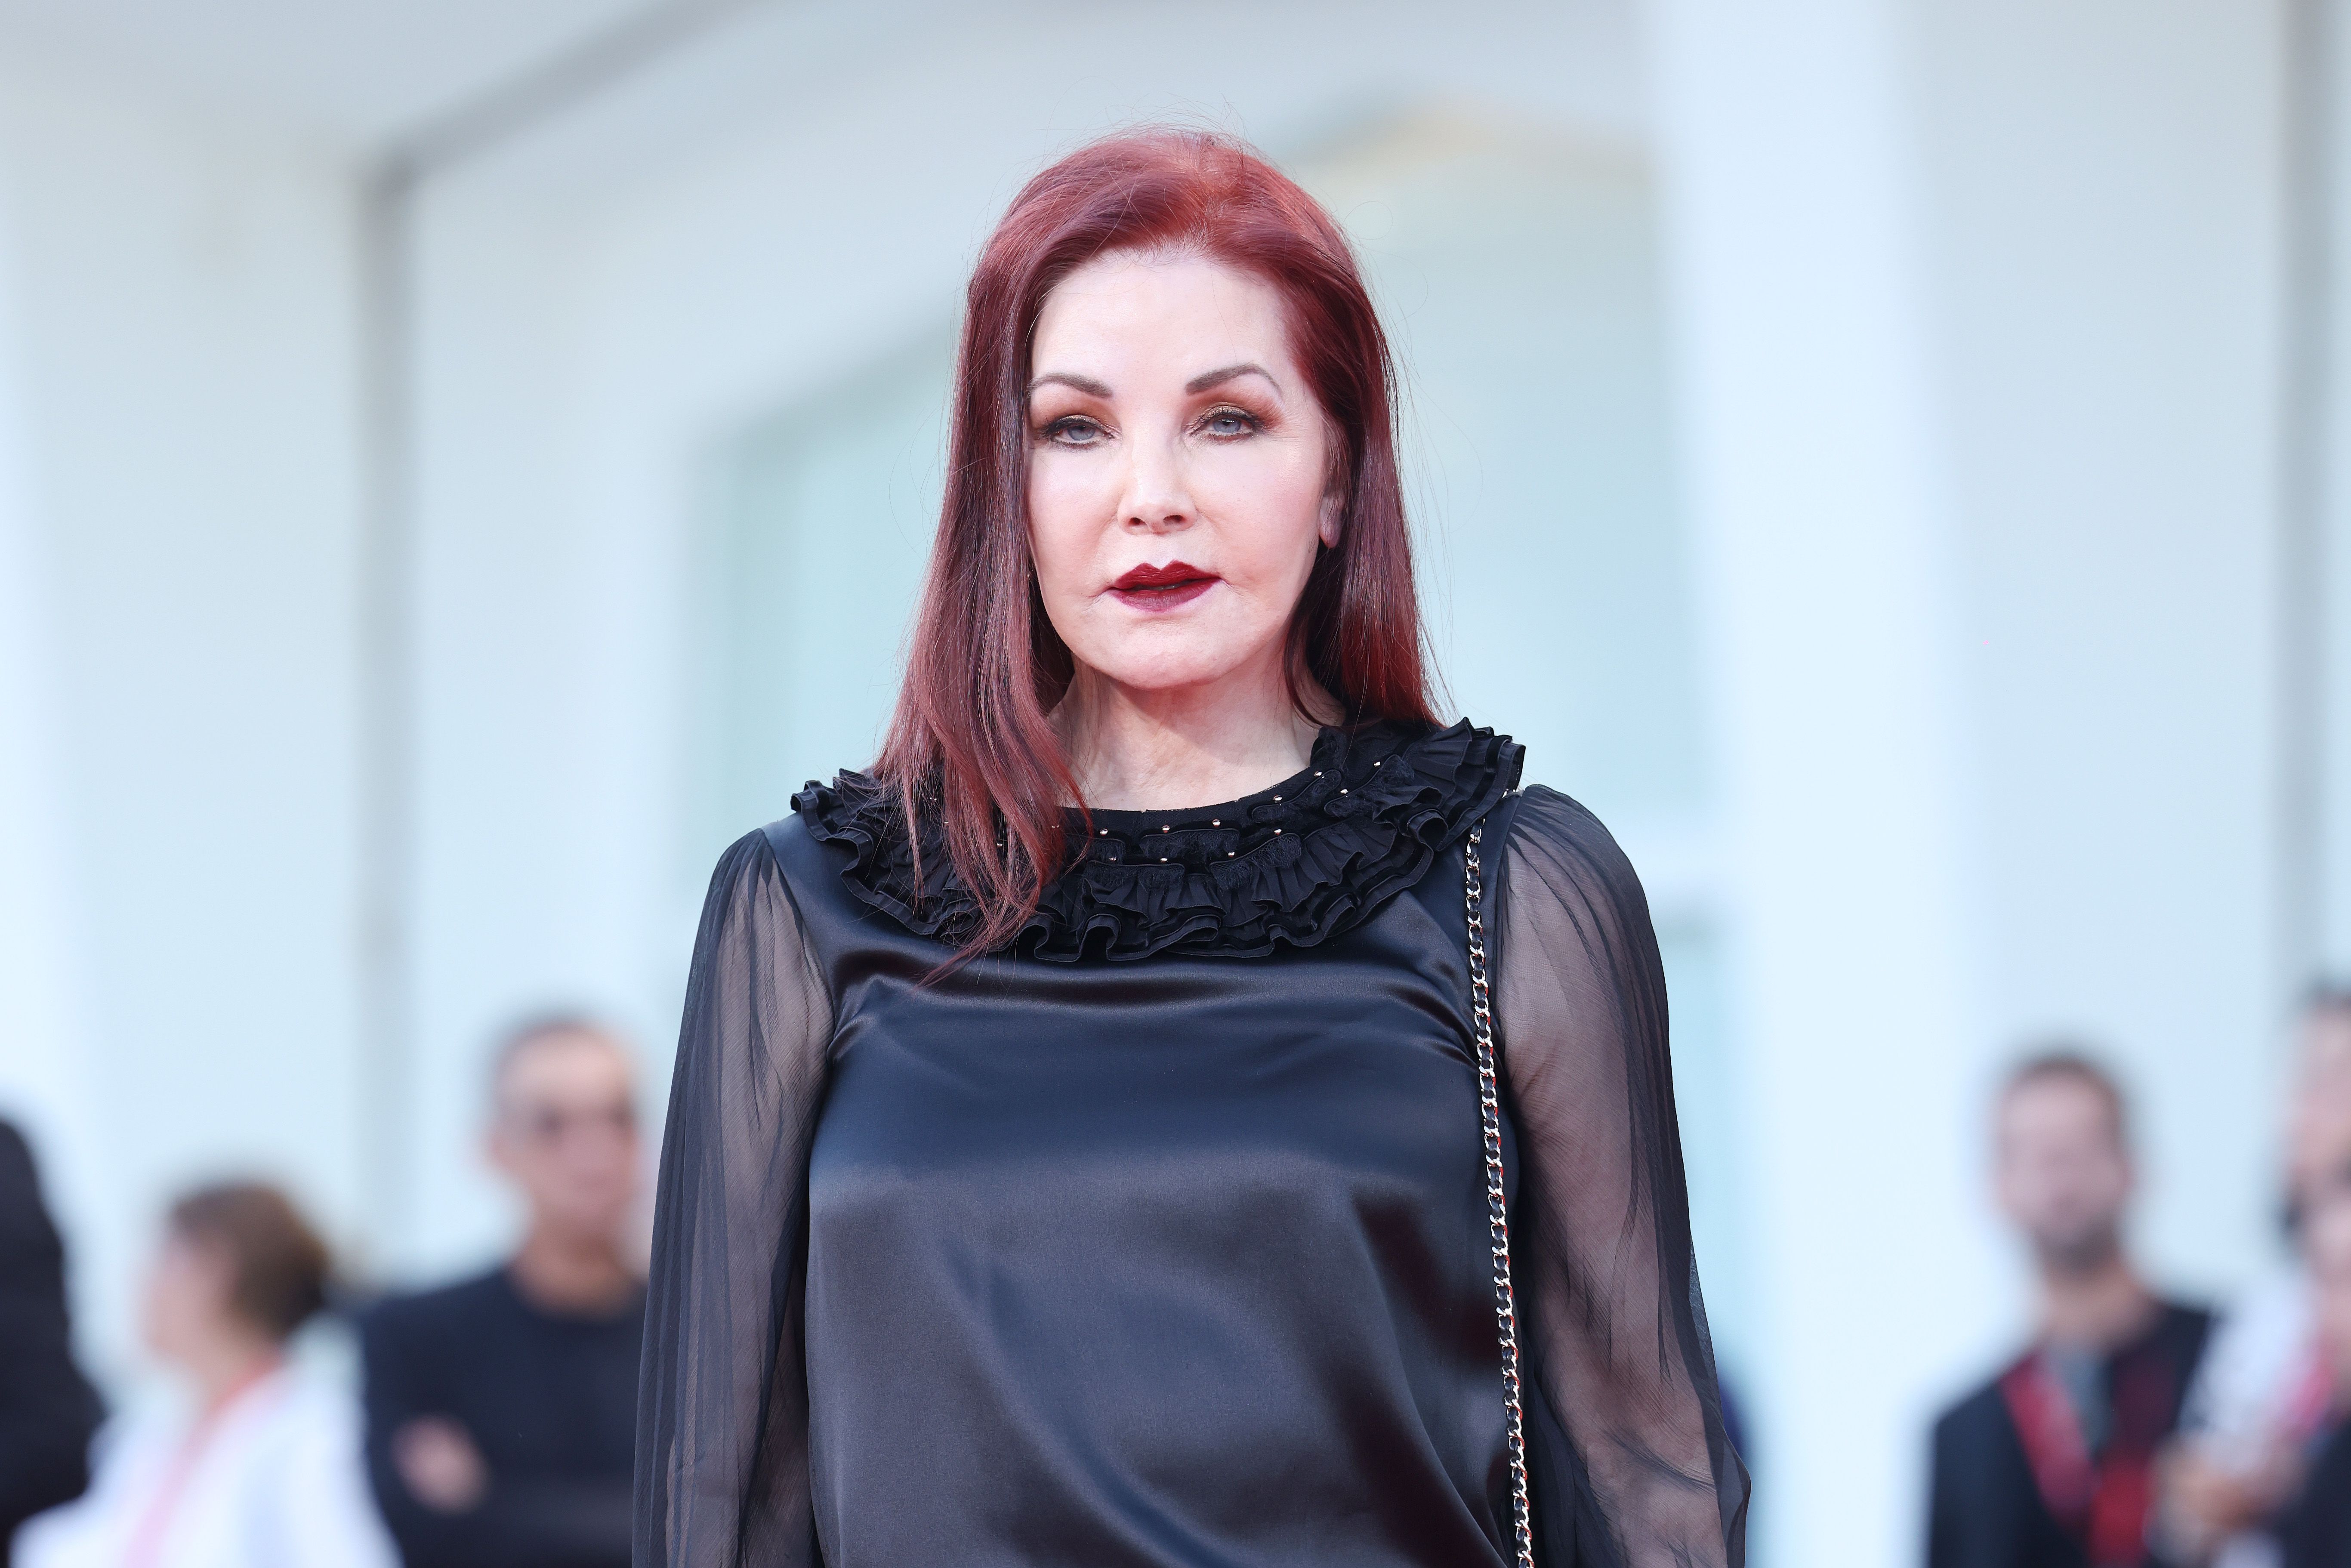 https://hips.hearstapps.com/hmg-prod/images/priscilla-presley-attends-a-red-carpet-for-the-movie-news-photo-1699025885.jpg